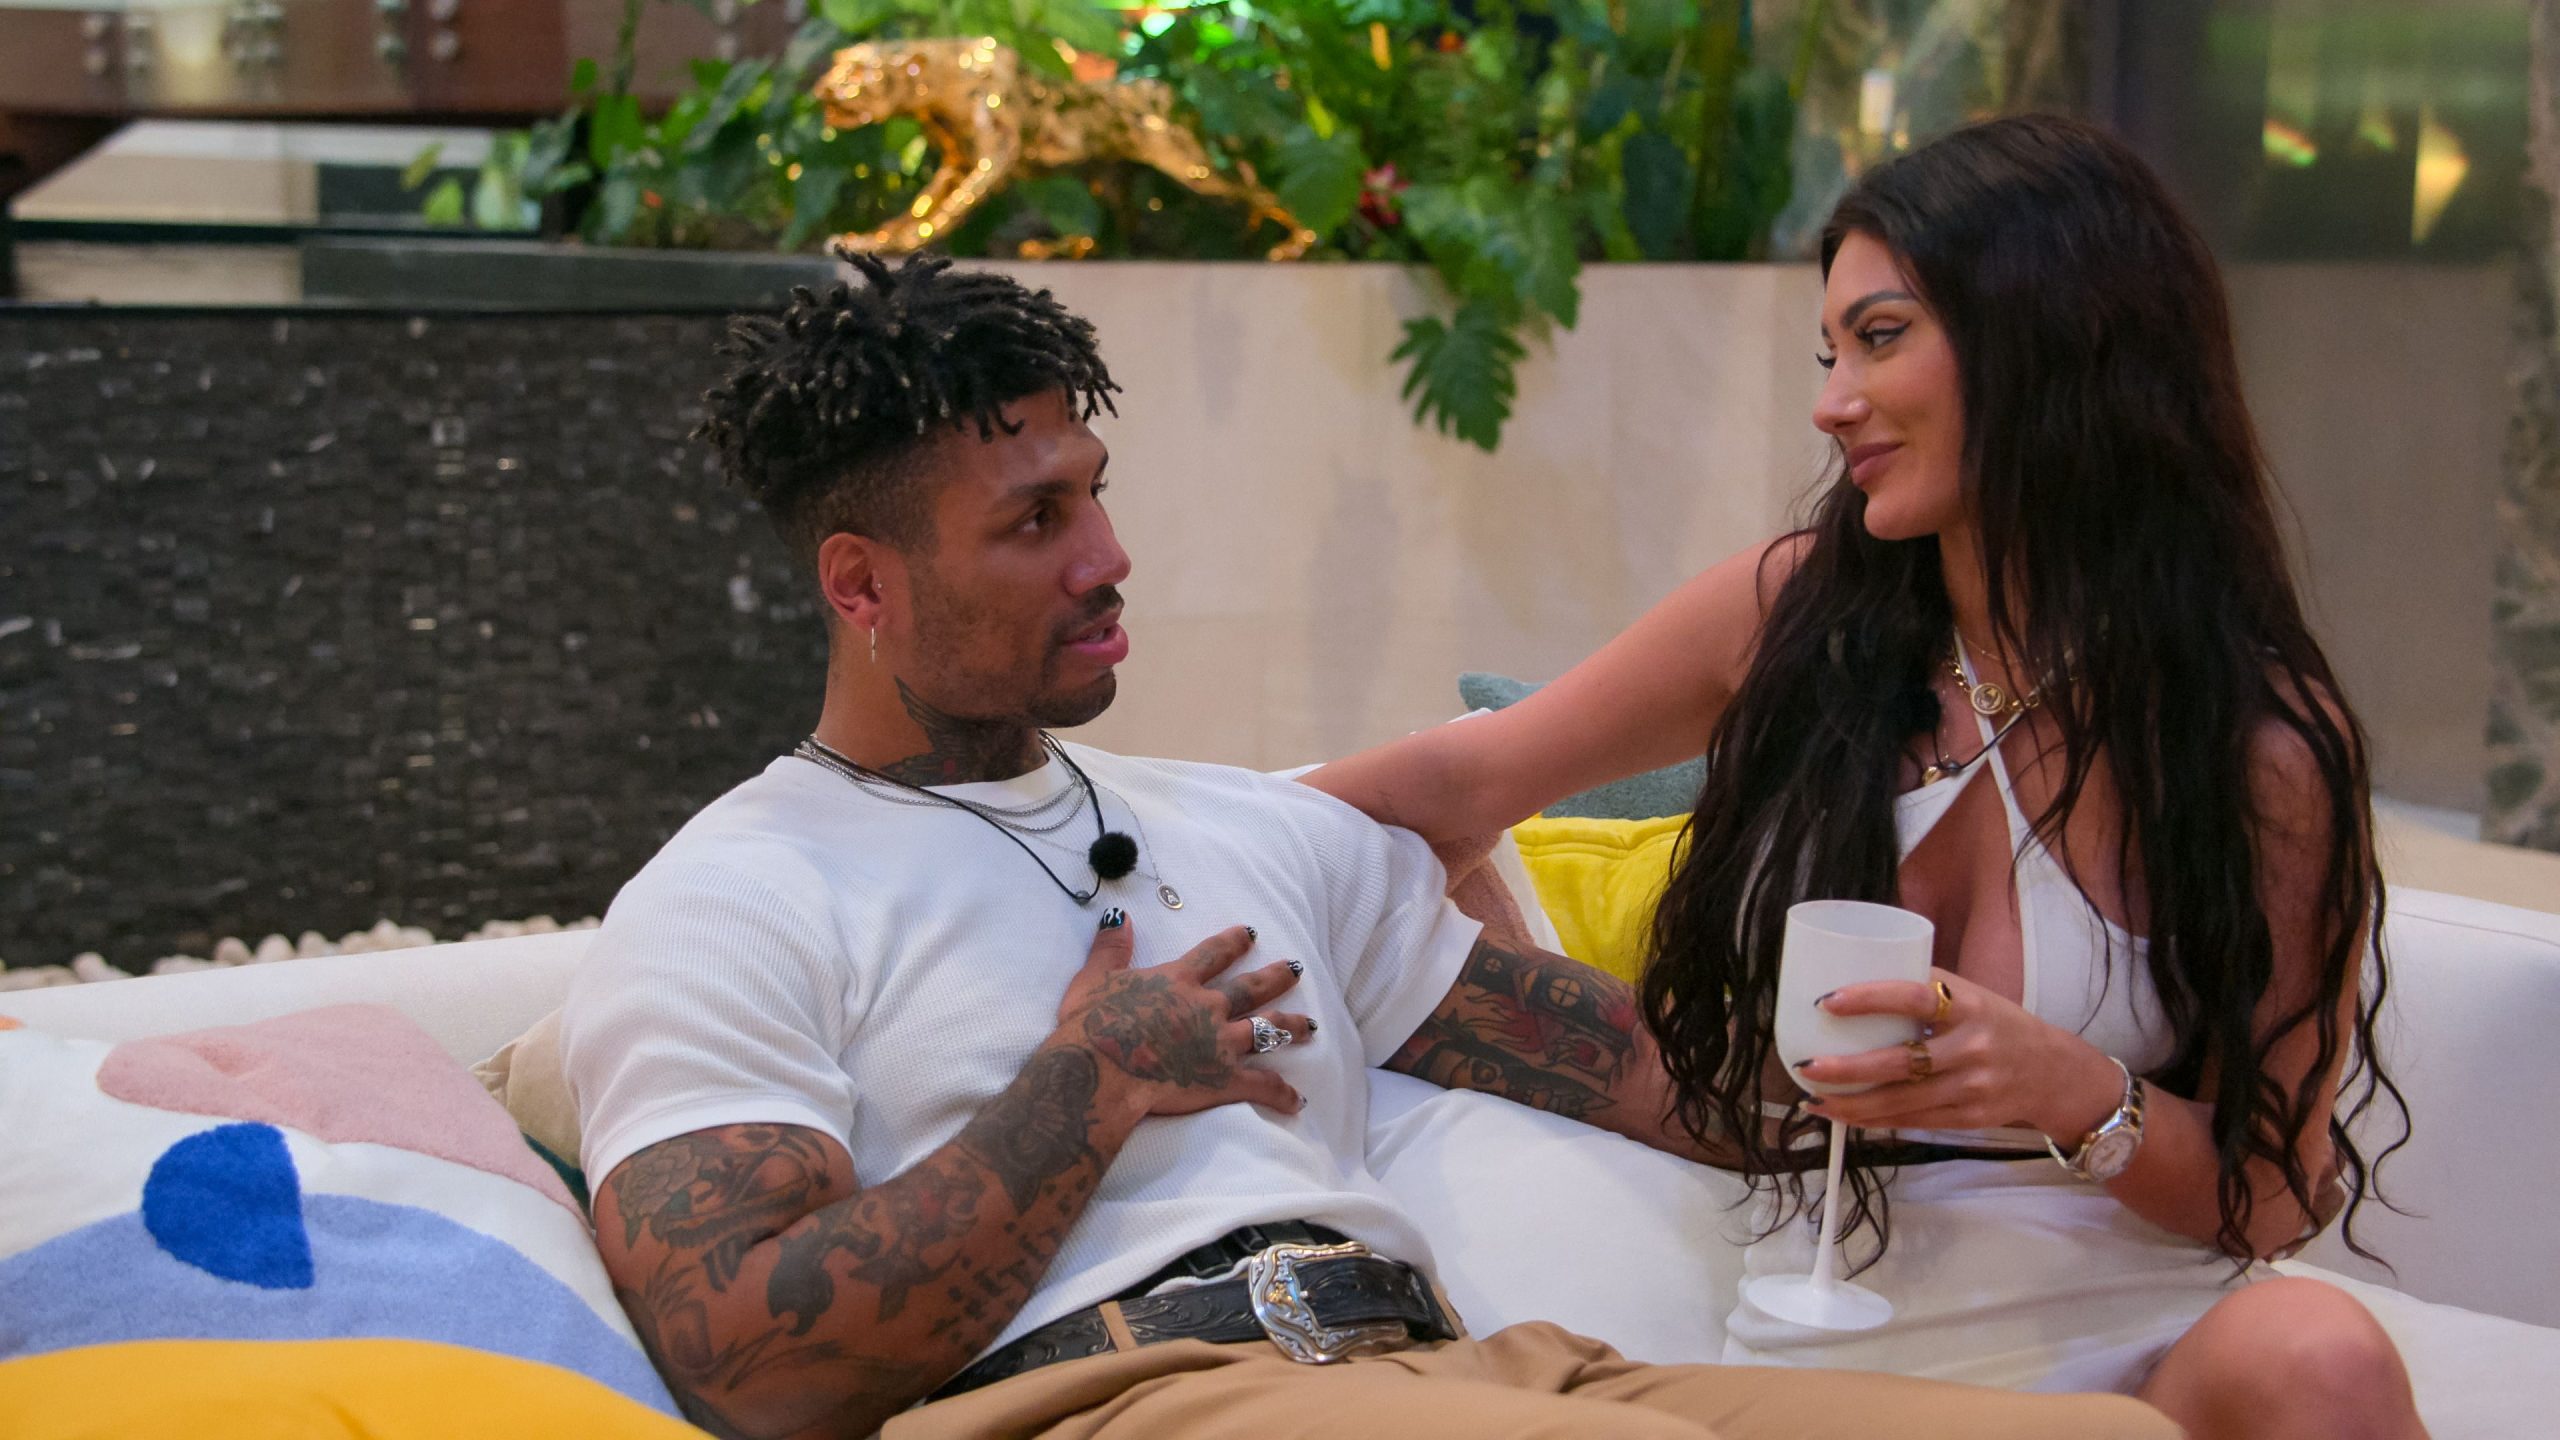 Are 'Perfect Match' Francesca and Dom Still Together?